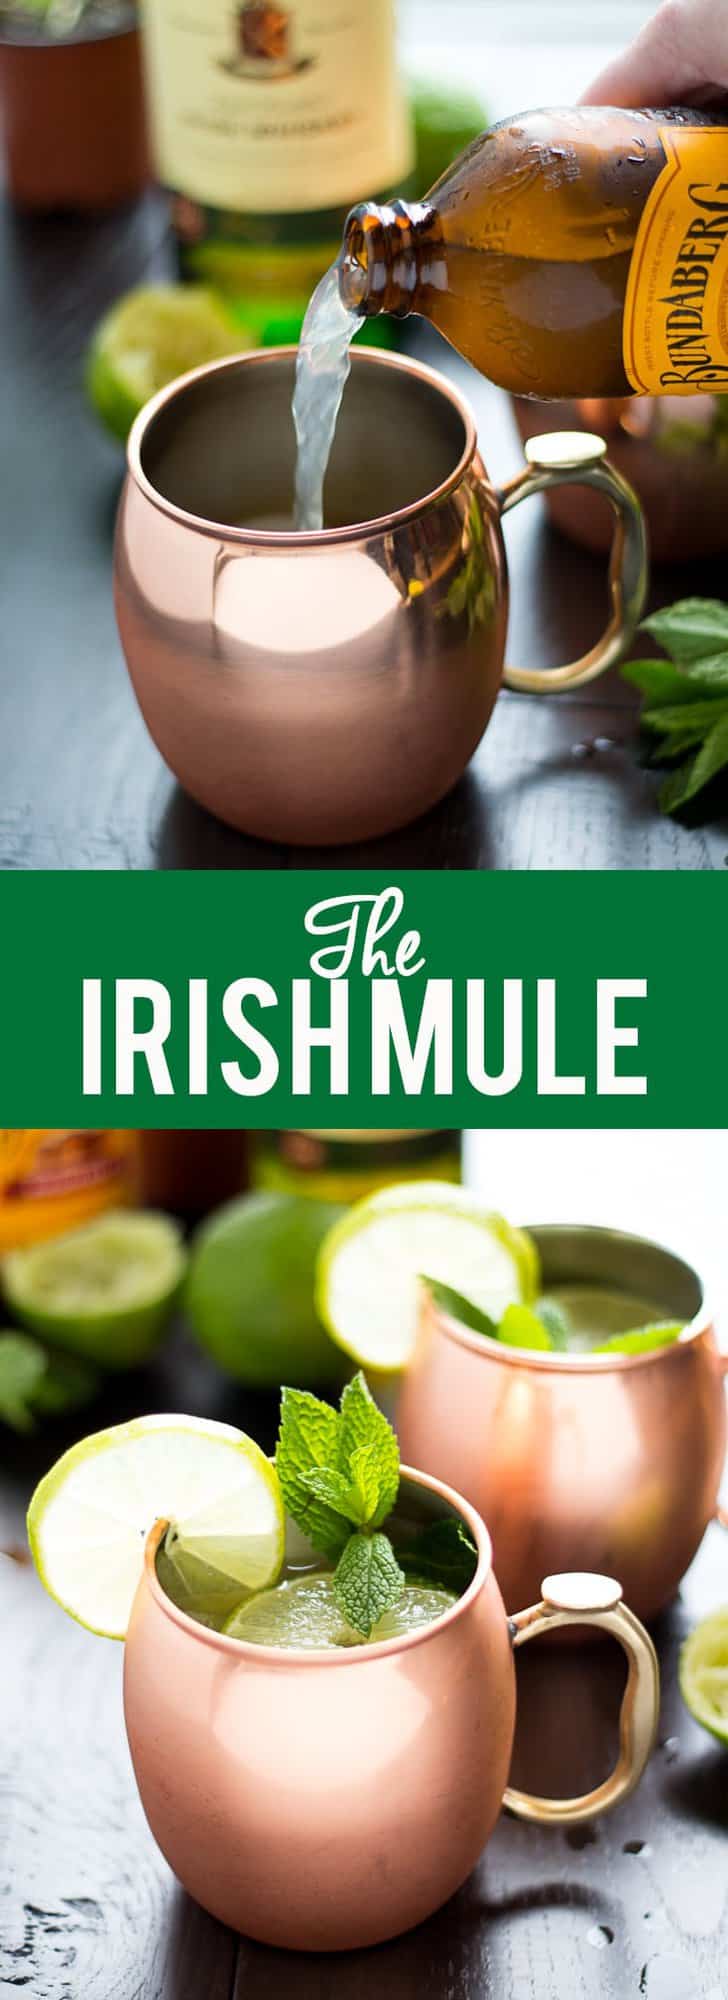 The Irish Mule is a refreshing cocktail made with ginger beer, lime juice and whiskey. Enjoy this on Saint Patrick's Day or any time of year!